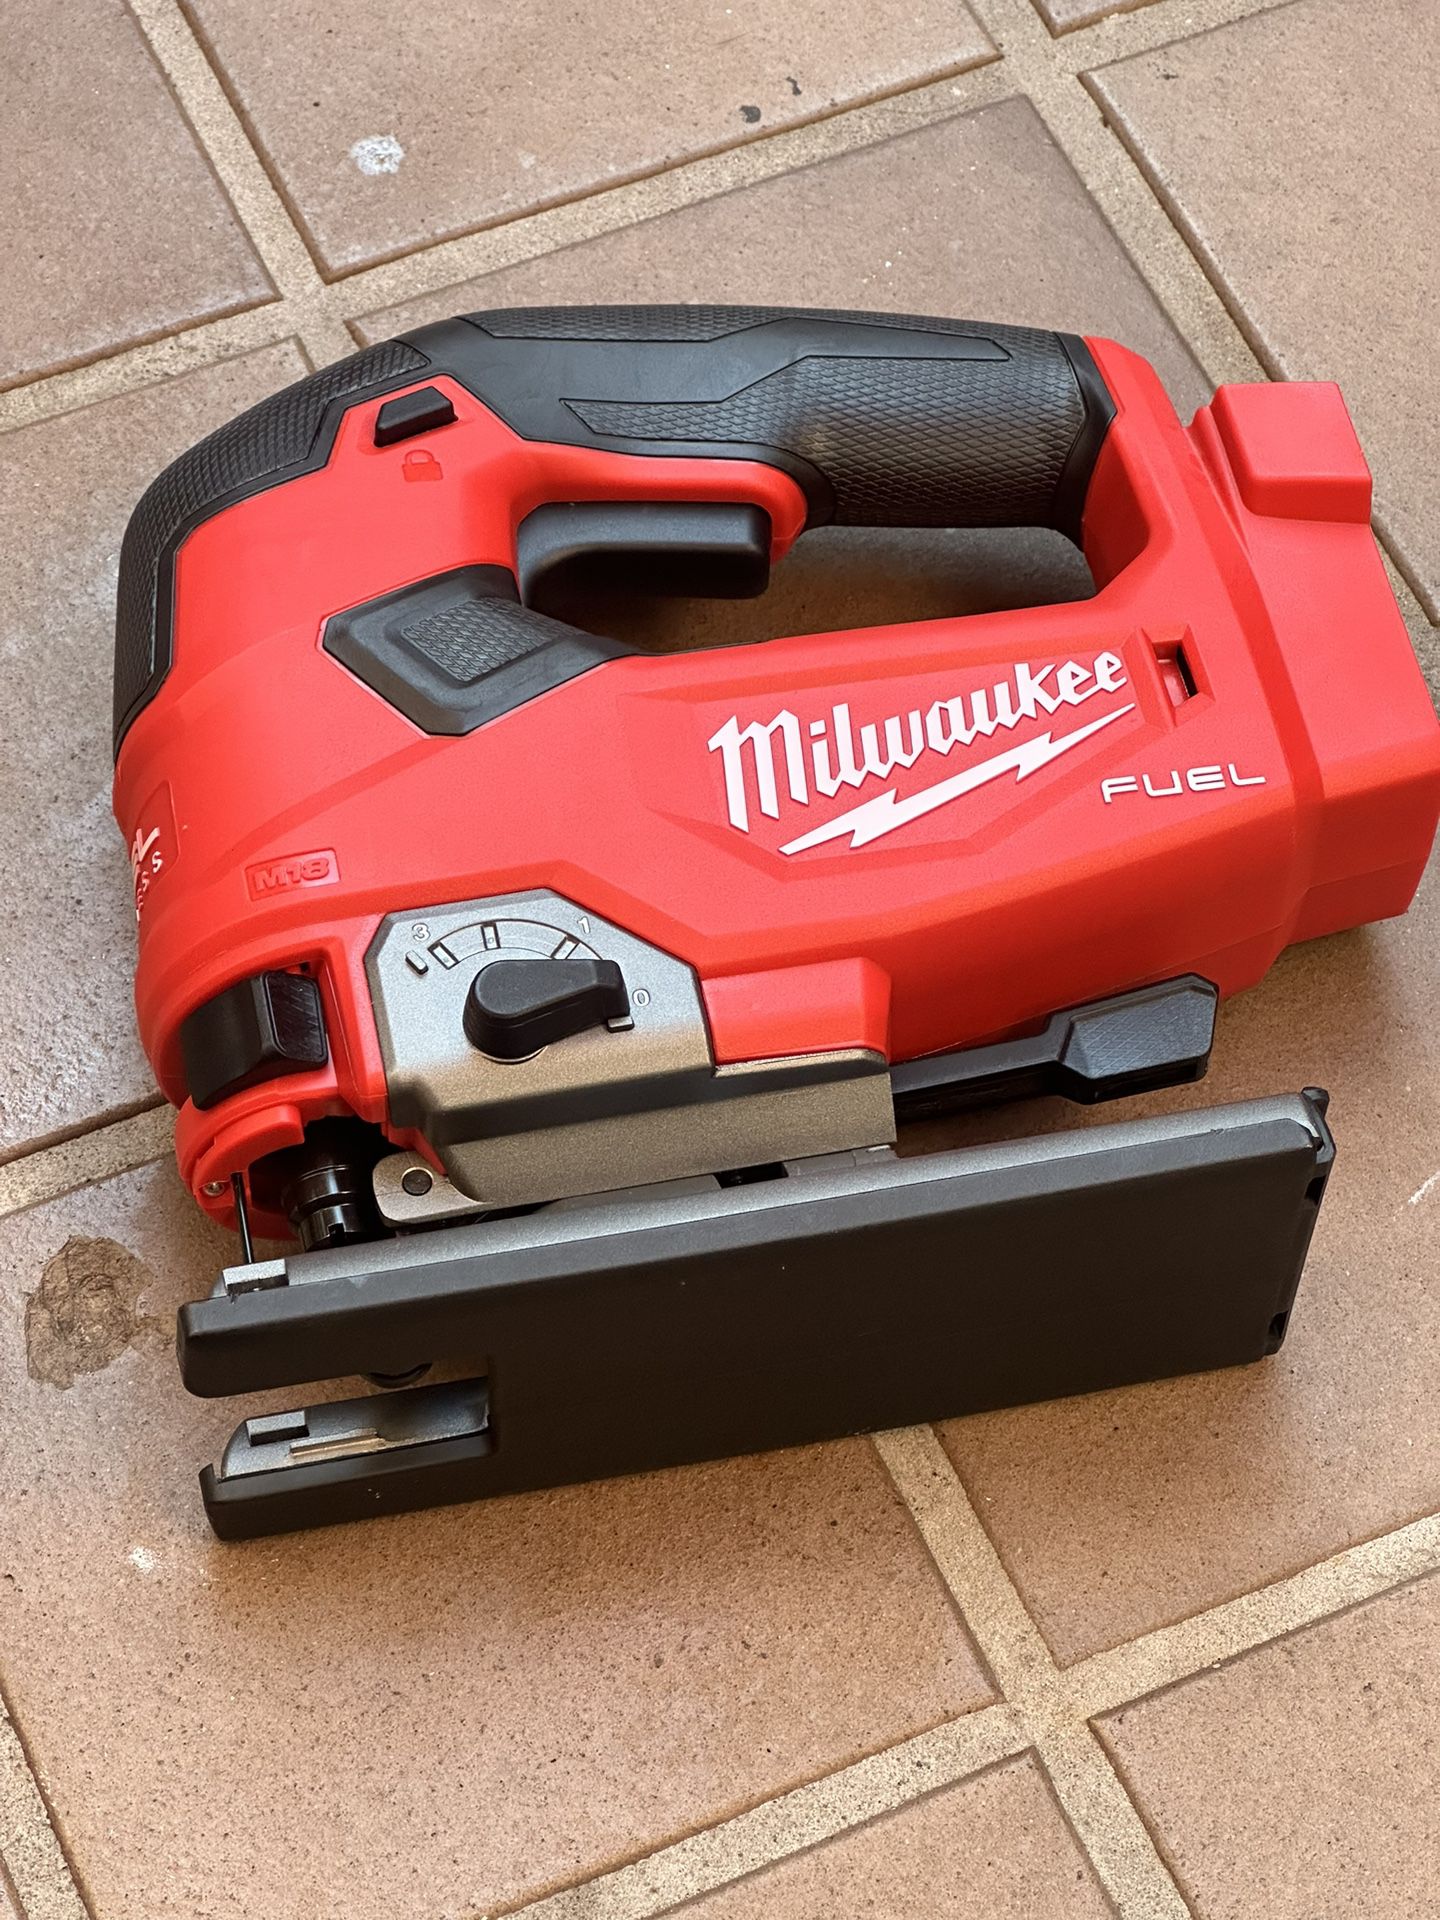 Milwaukee M18 FUEL 18V Lithium-Ion Brushless Cordless Jig Saw (Tool-Only)